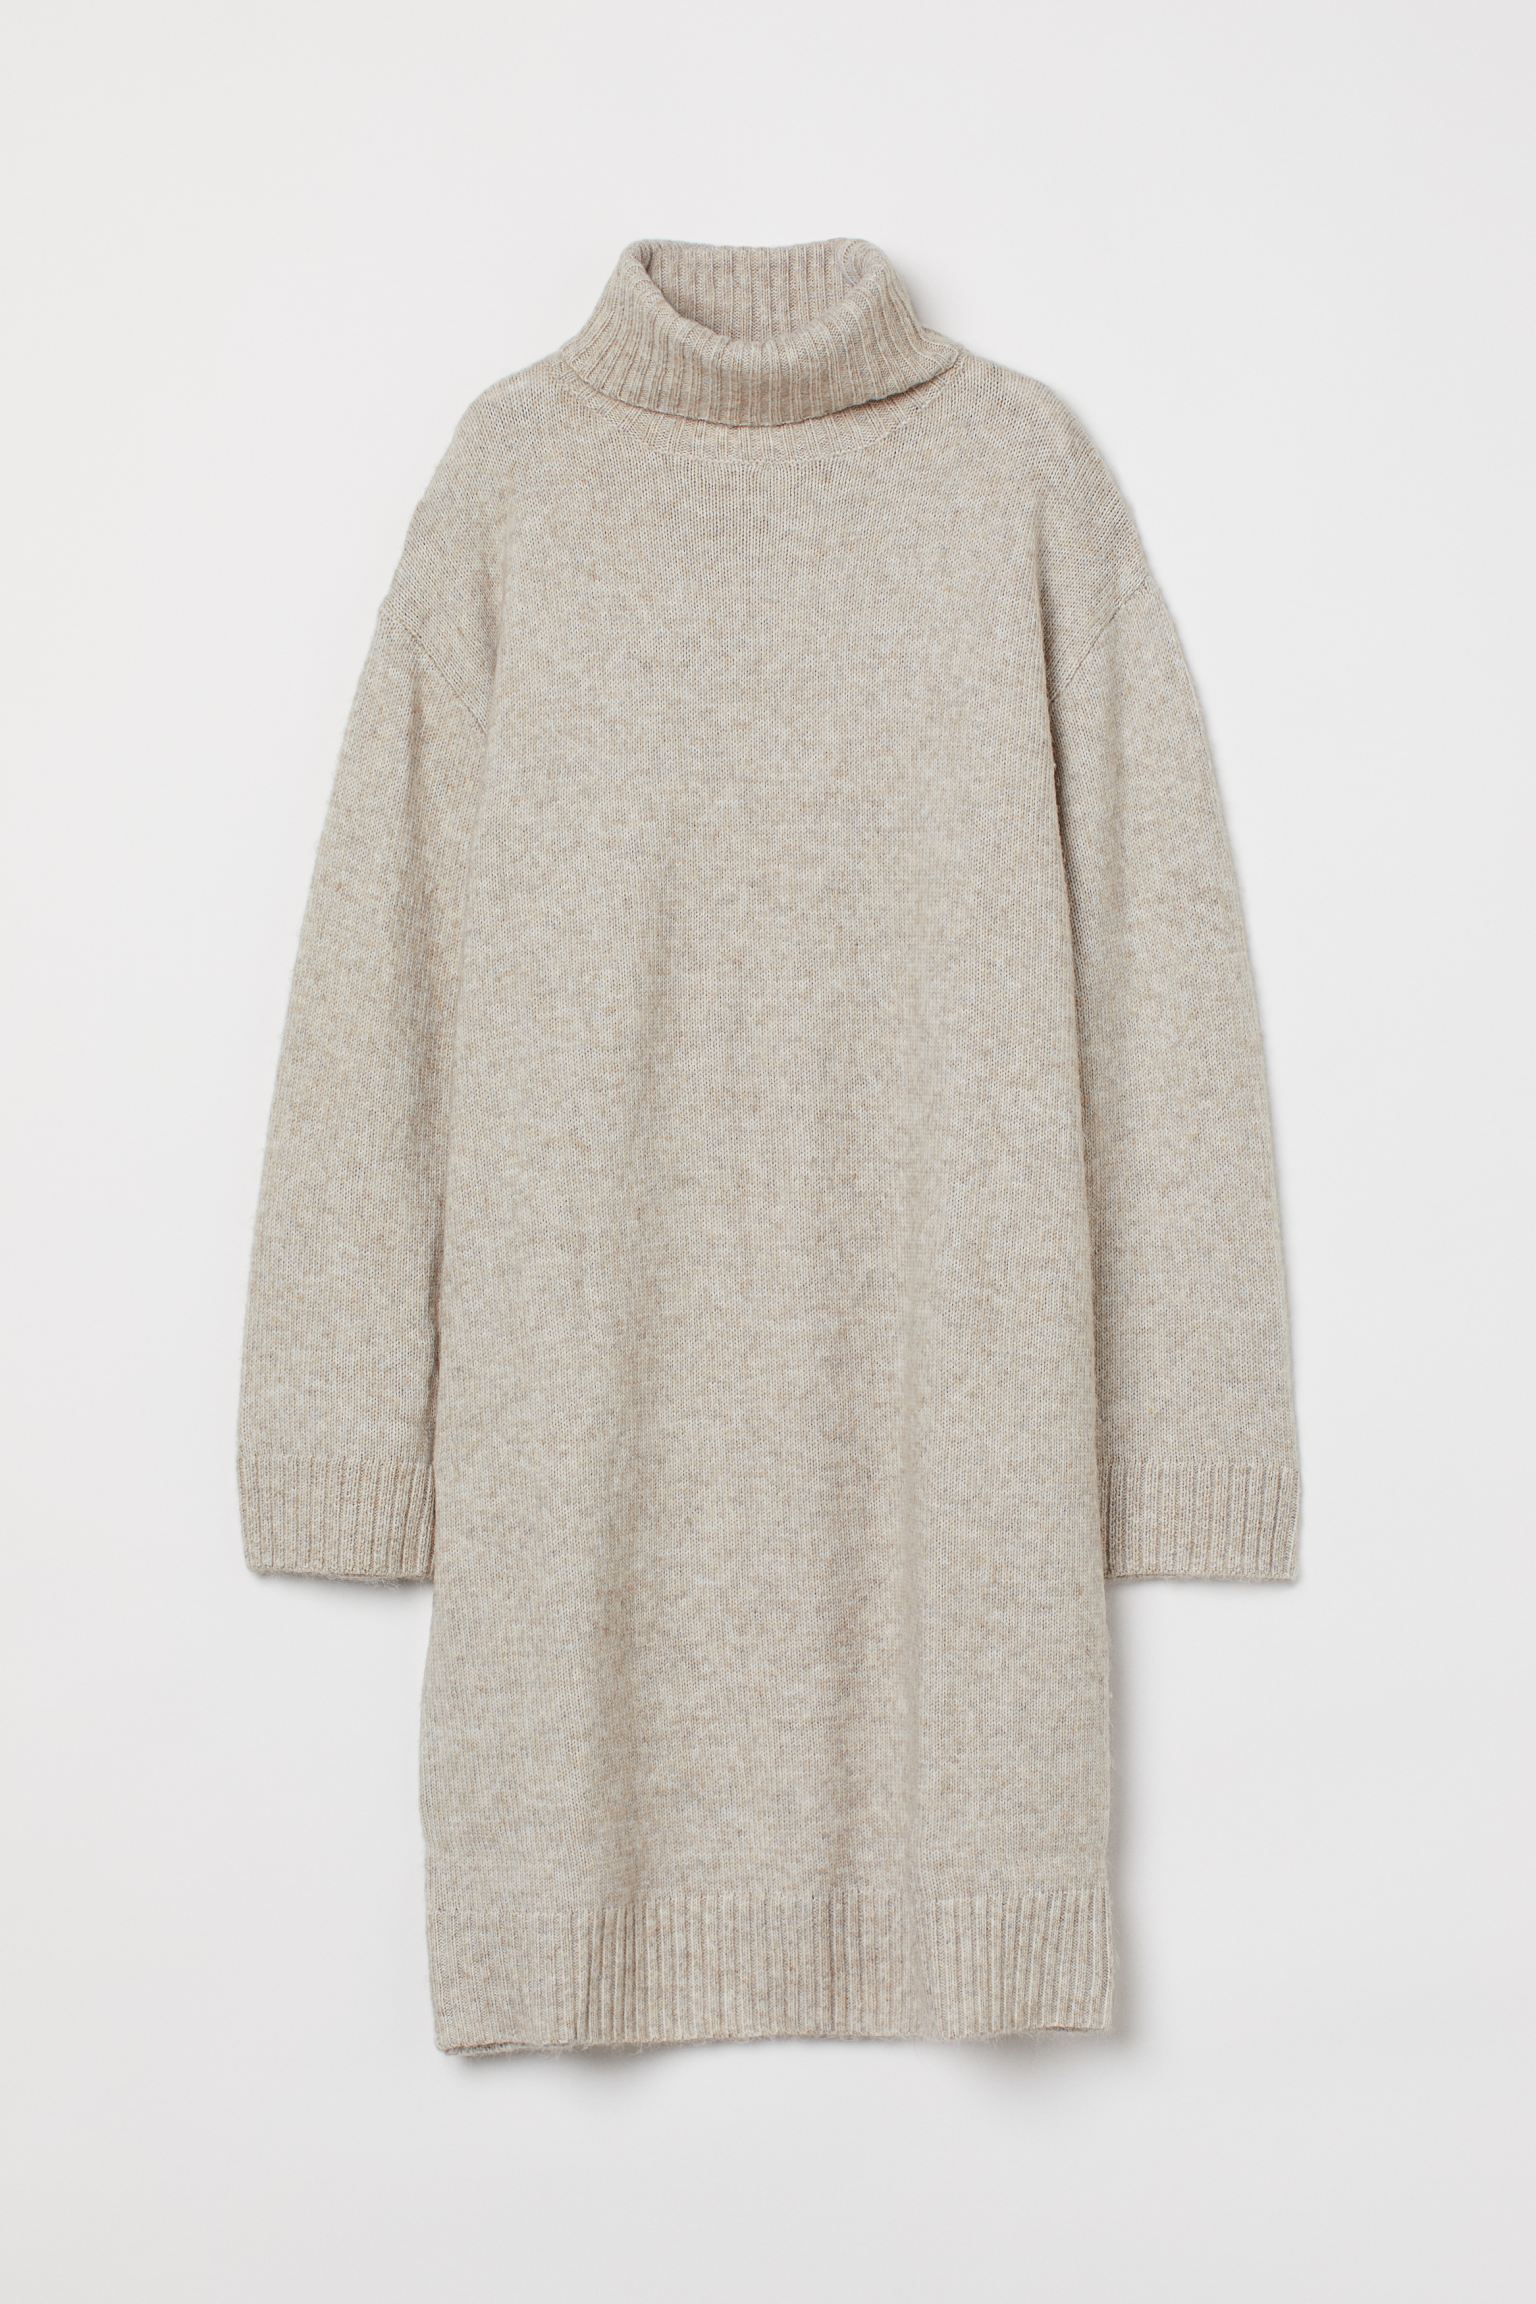 H&M Knitted Polo Neck Dress